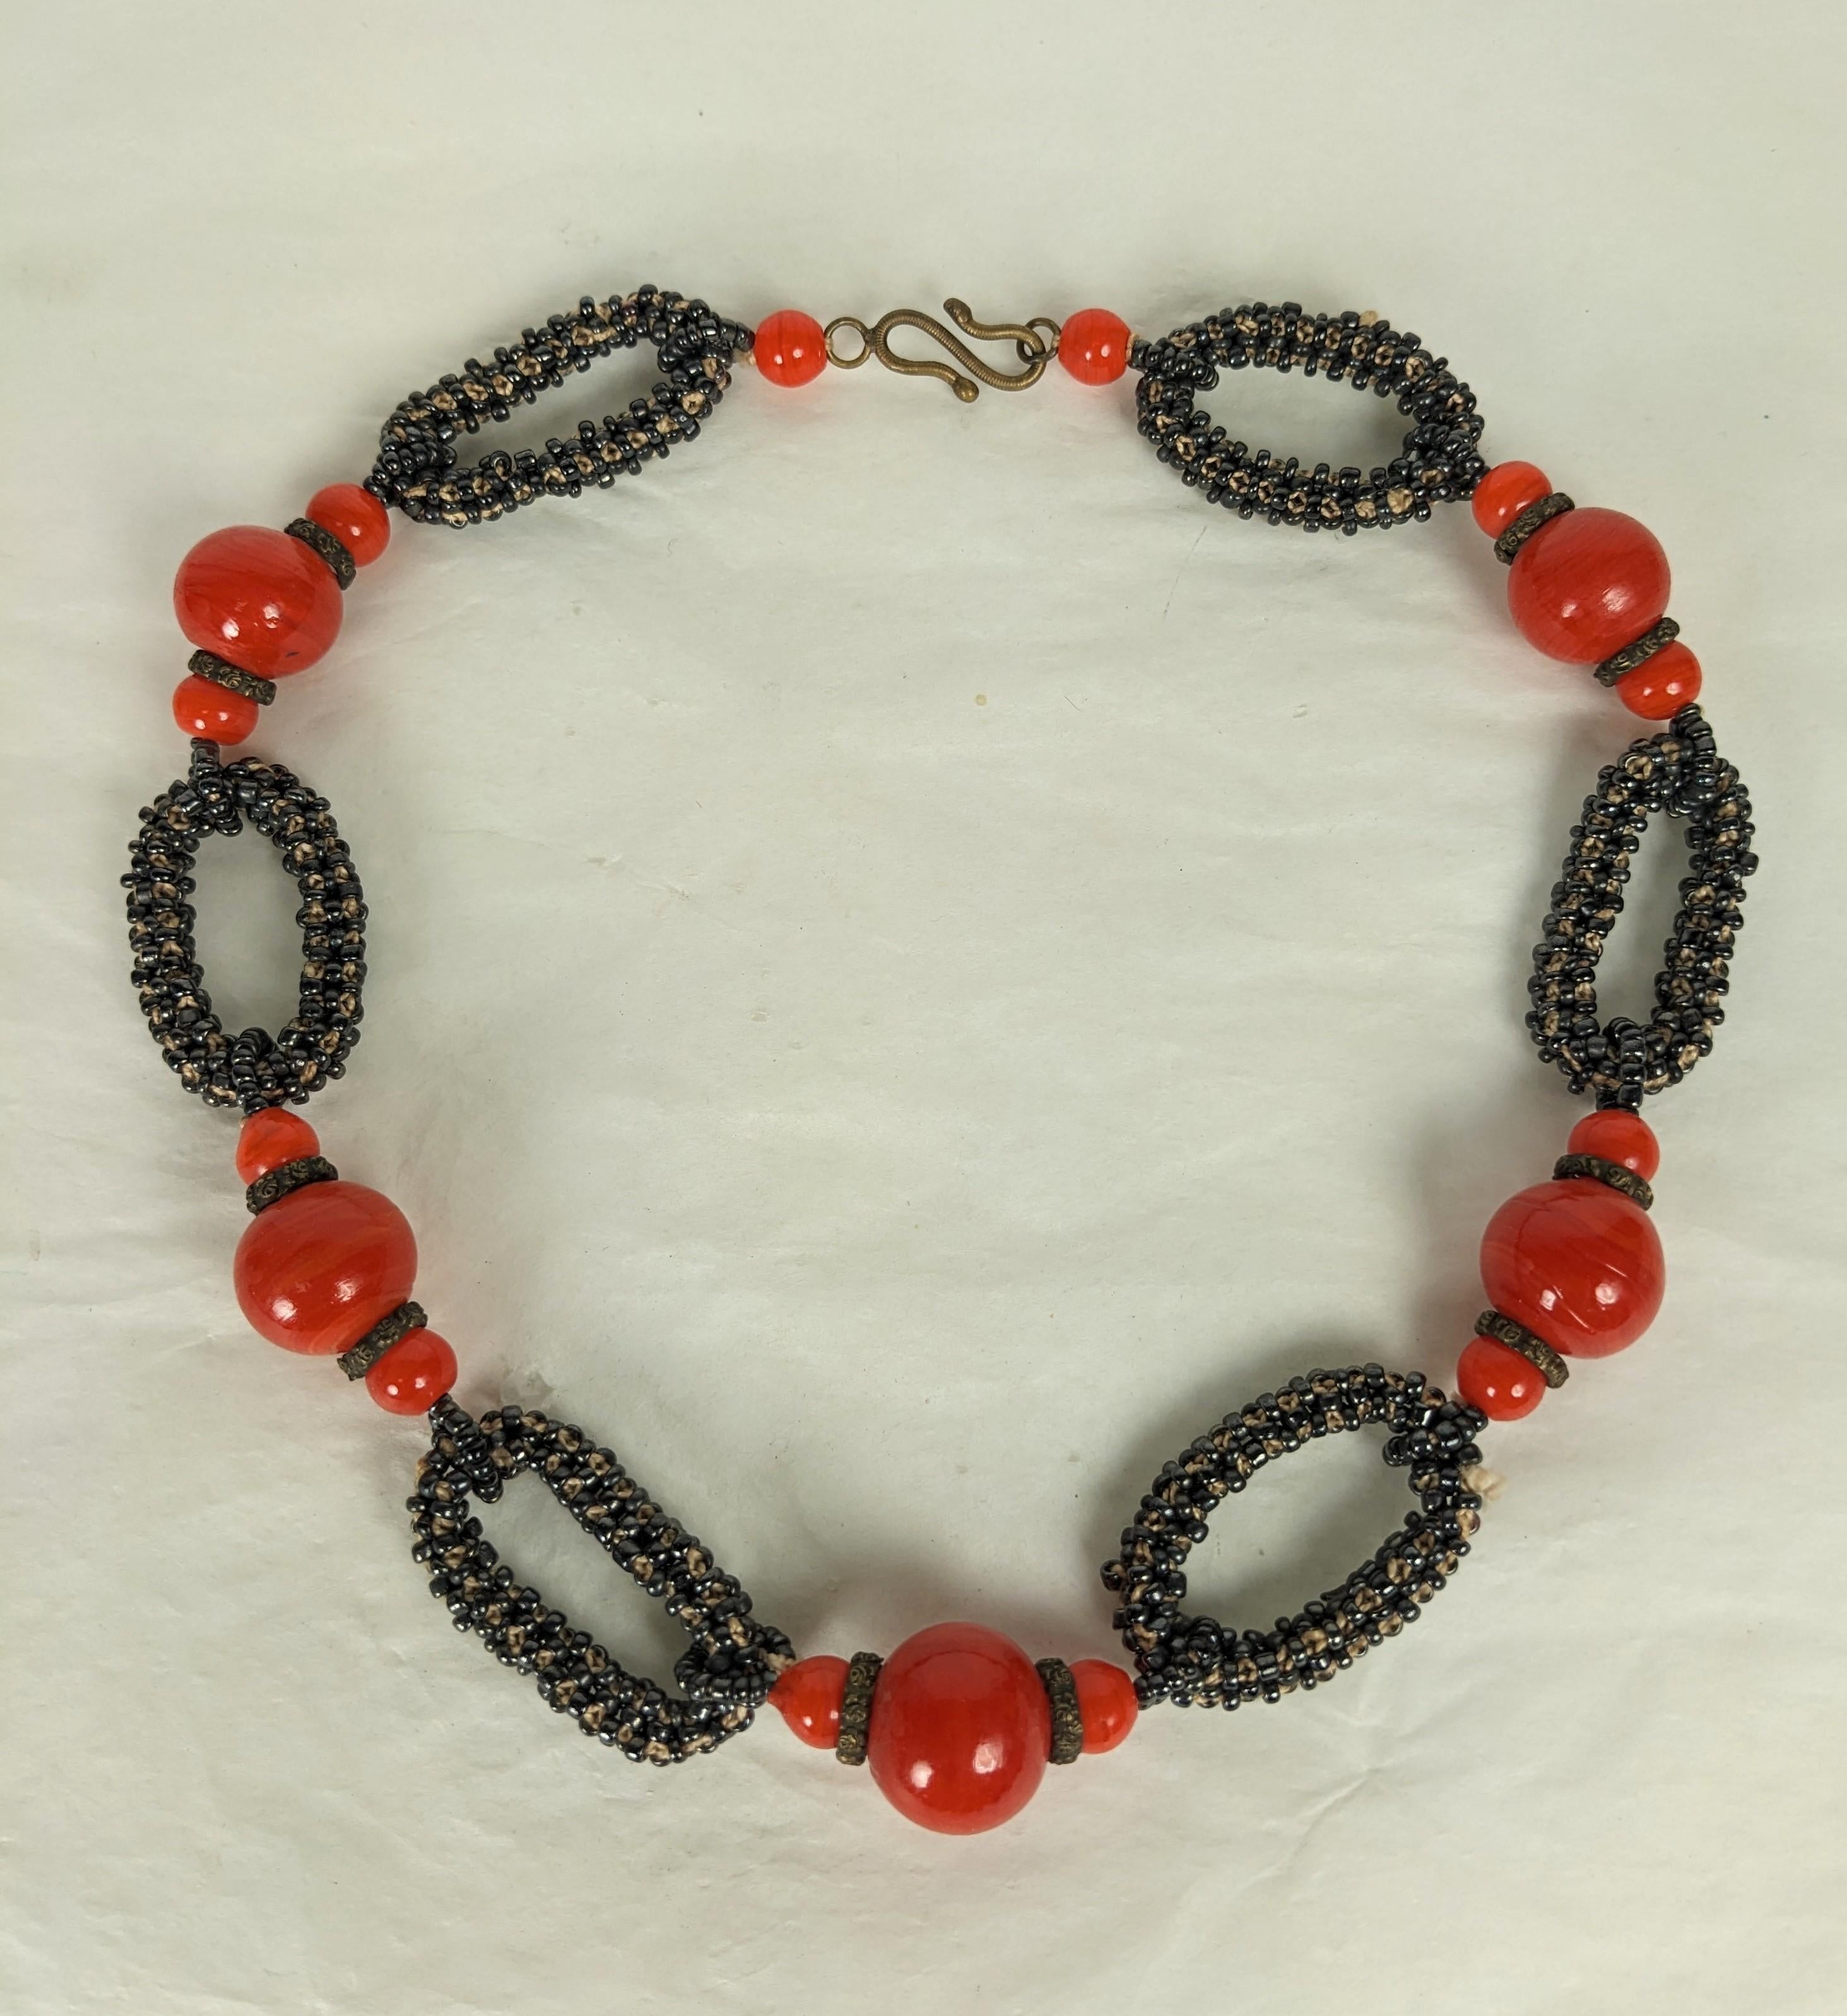 Elegant, handmade Italian Pate de Verre Seed Bead Chain from the 1940's. Chain links of hand of crochet charcoal seed beads are spaced with orangey red glass beads. Engraved brass spacers and fittings. 1940's Italy. 21